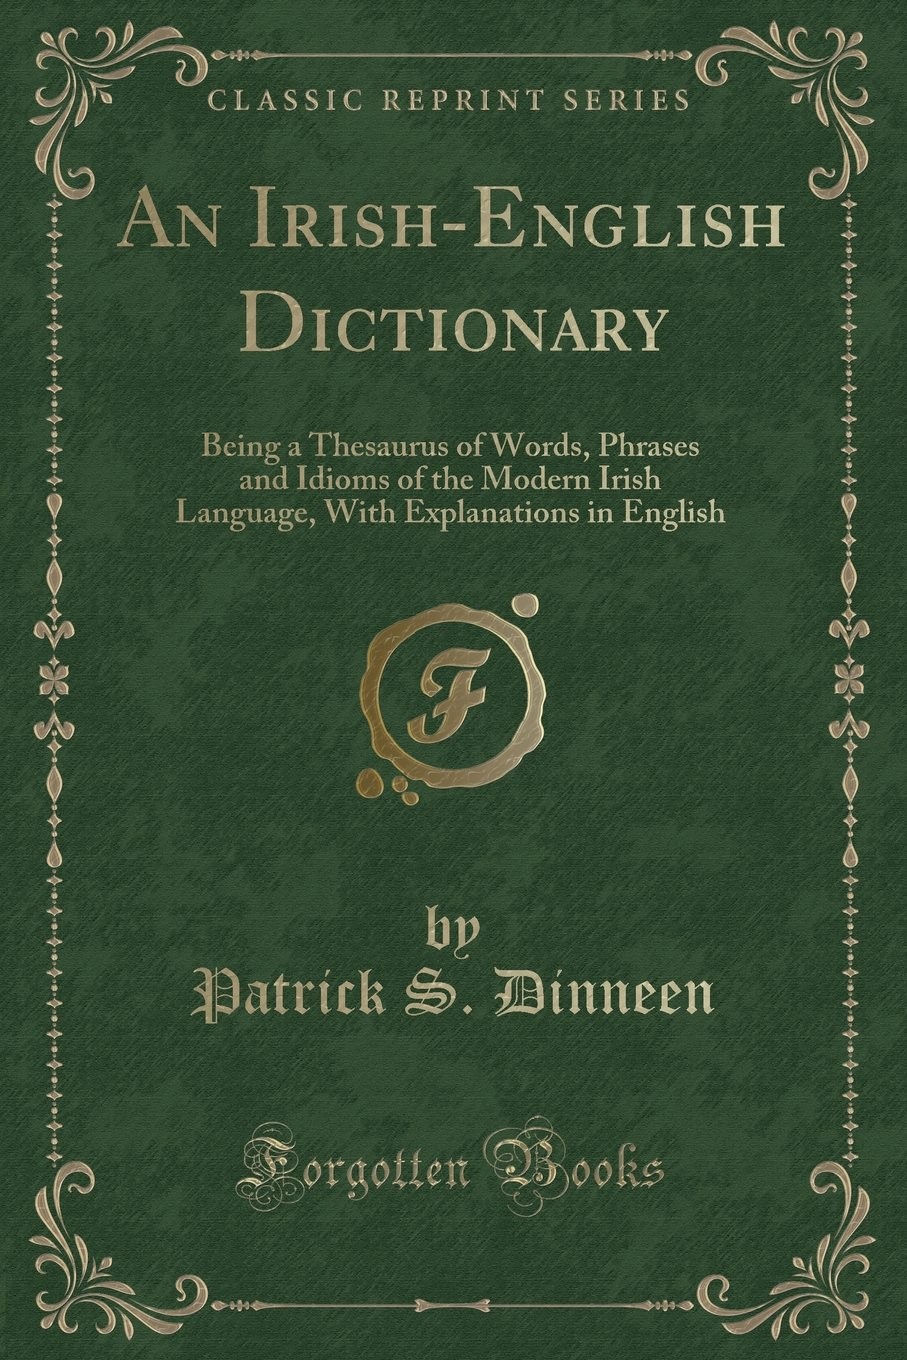 Foclóir gaedilge agus béarla : An Irish-English dictionary, being a thesaurus of words, phrases and idioms of the modern Irish language